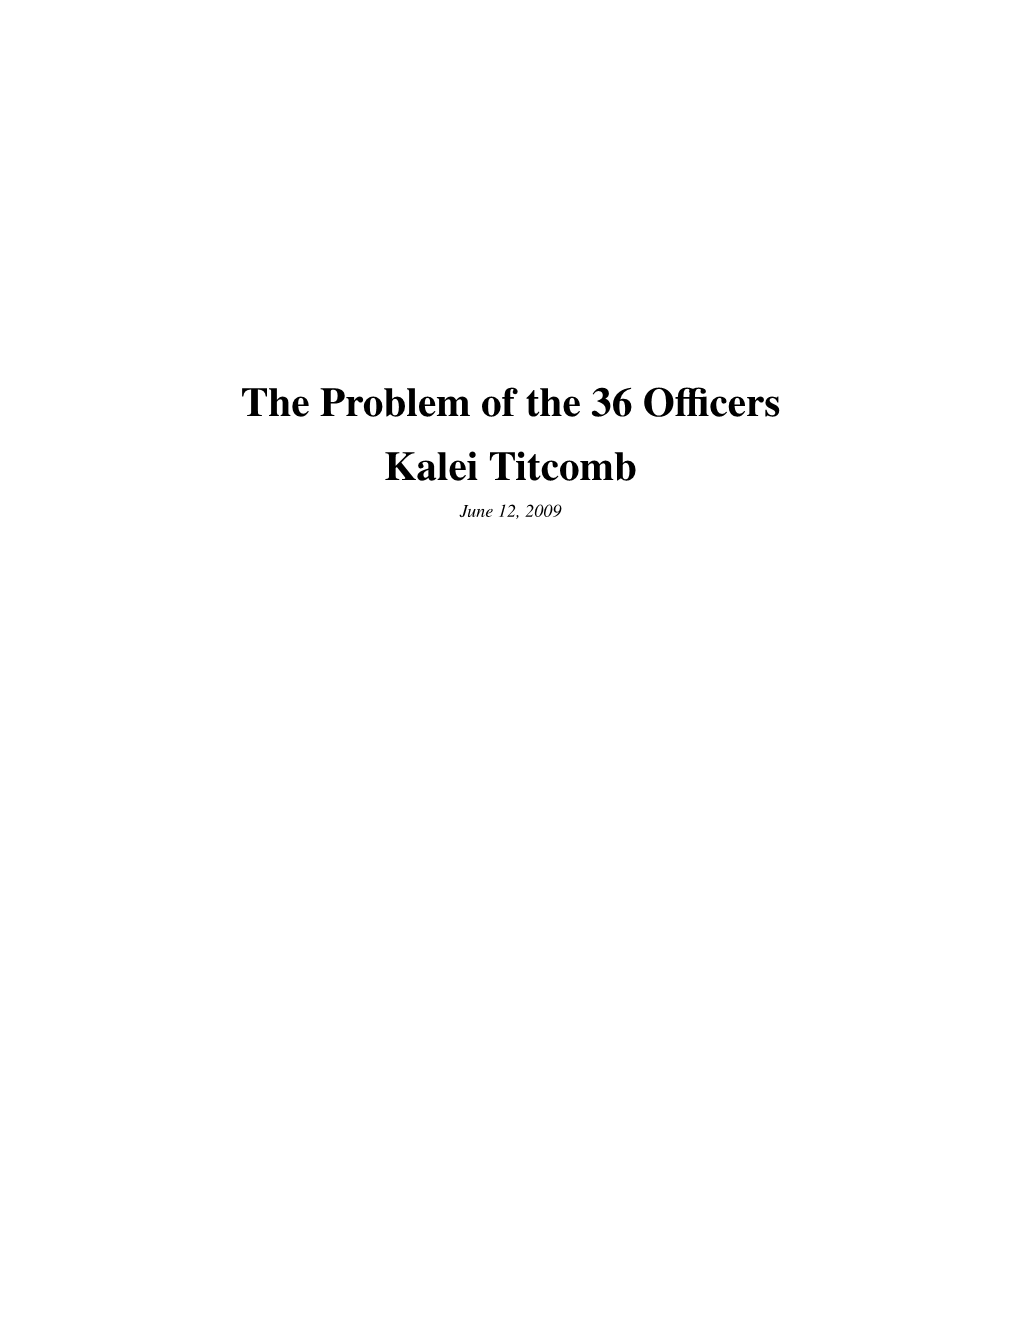 The Problem of the 36 Officers Kalei Titcomb